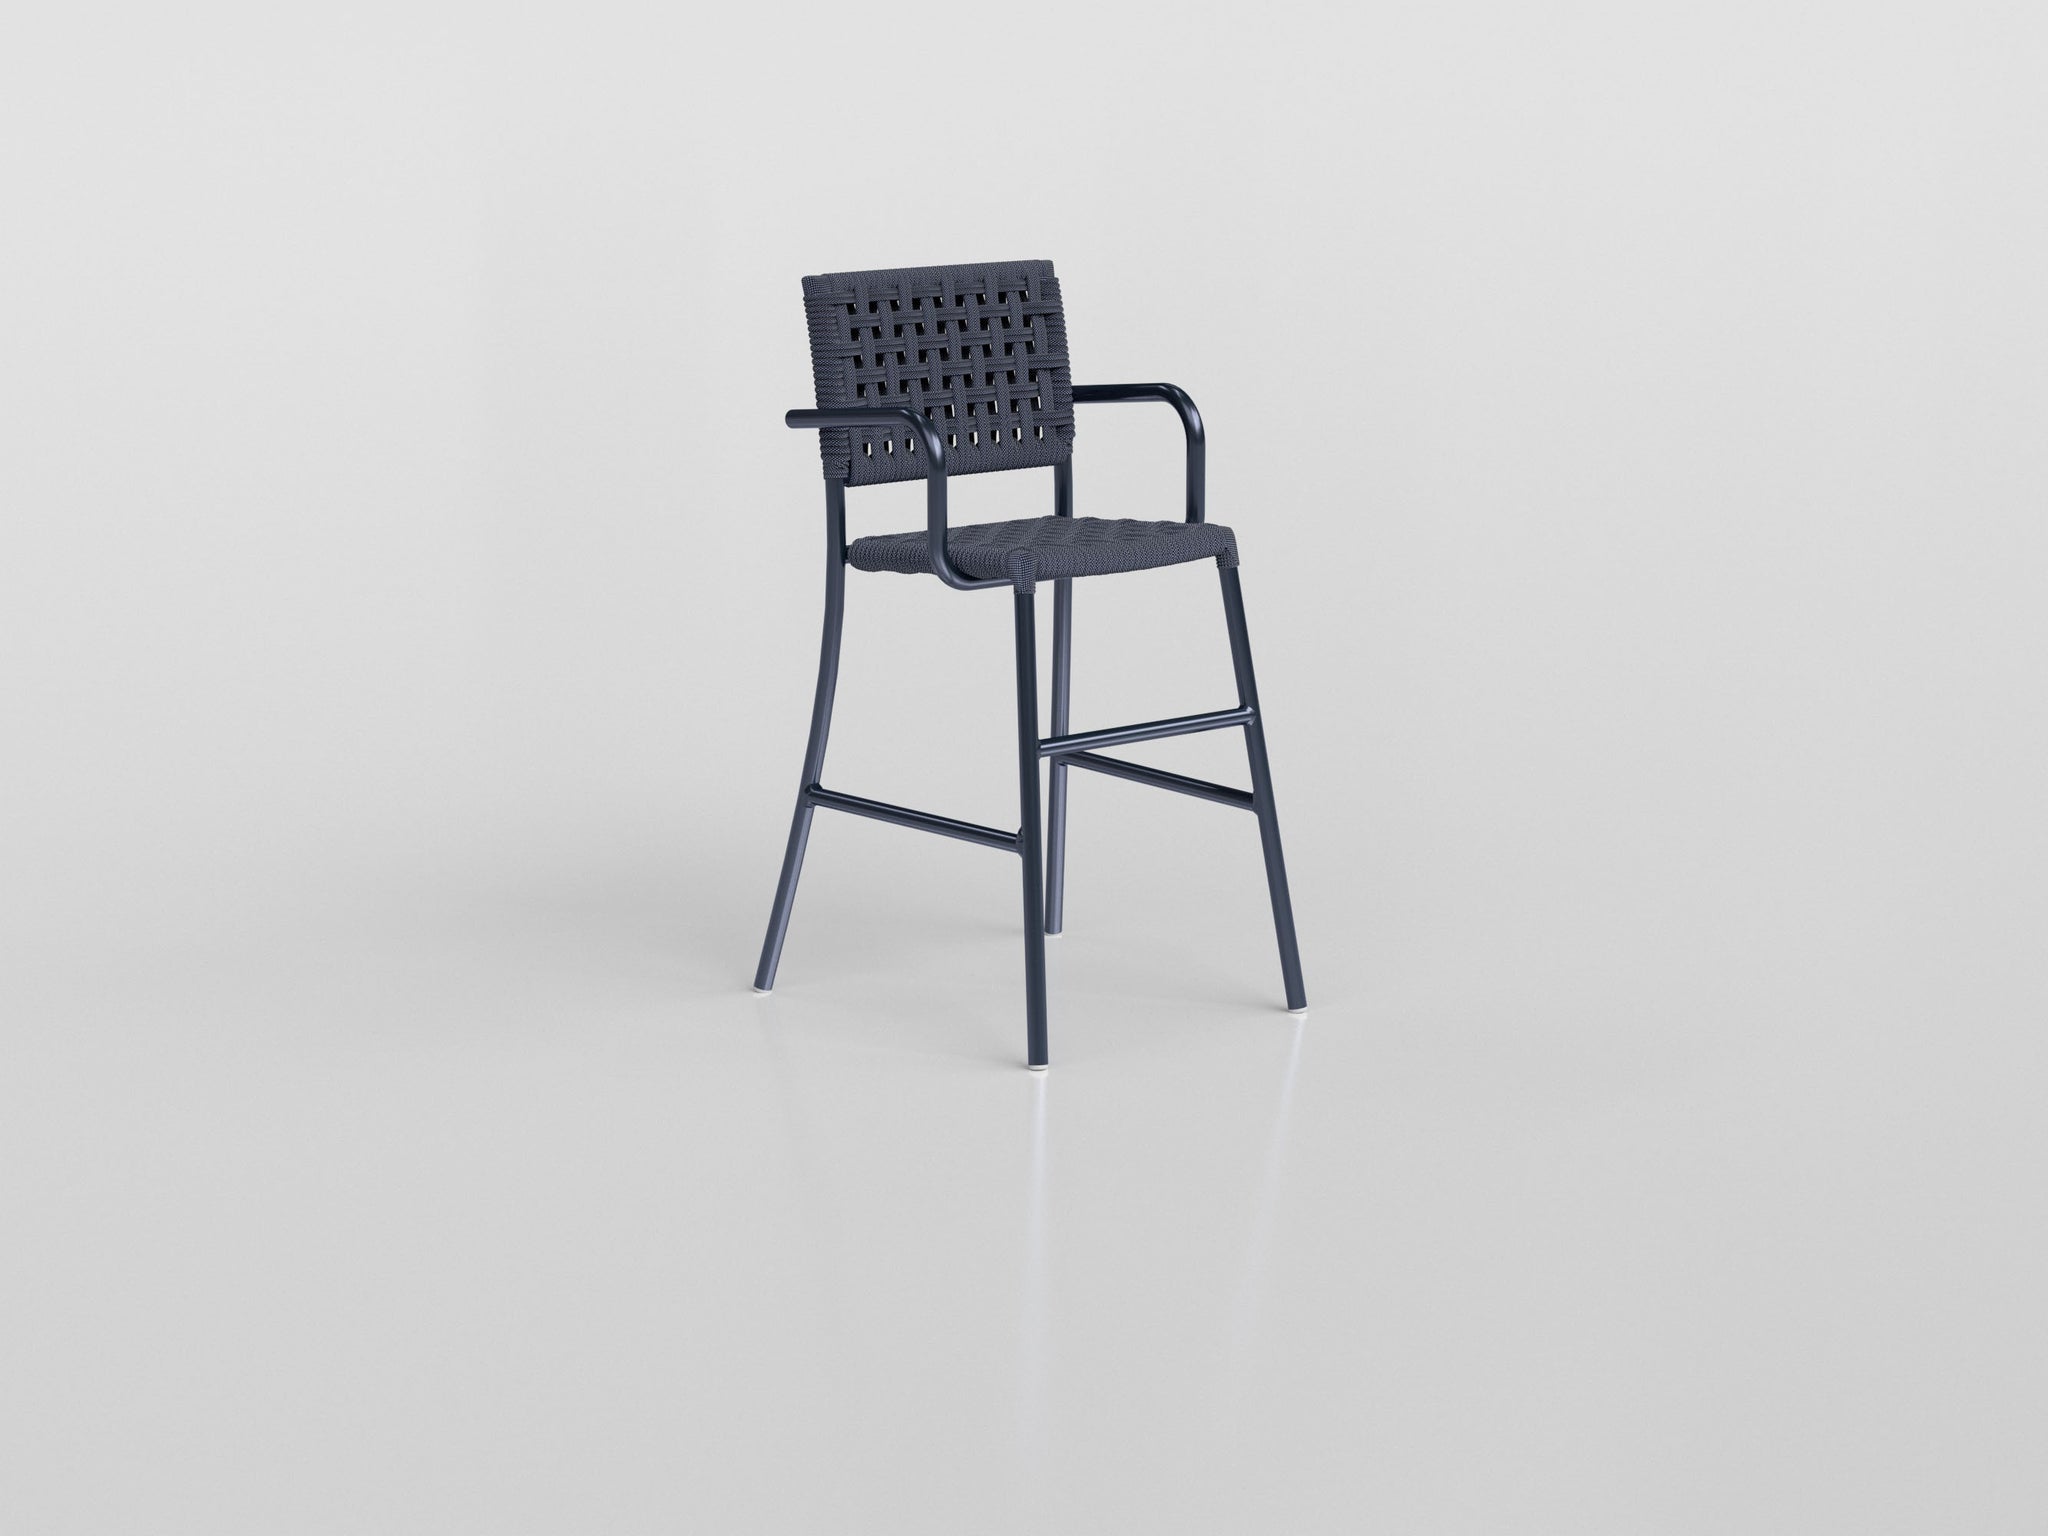 Giardino Kids High Chair made of aluminium with braided nautical rope seat and back, designed by Luciano Mandelli